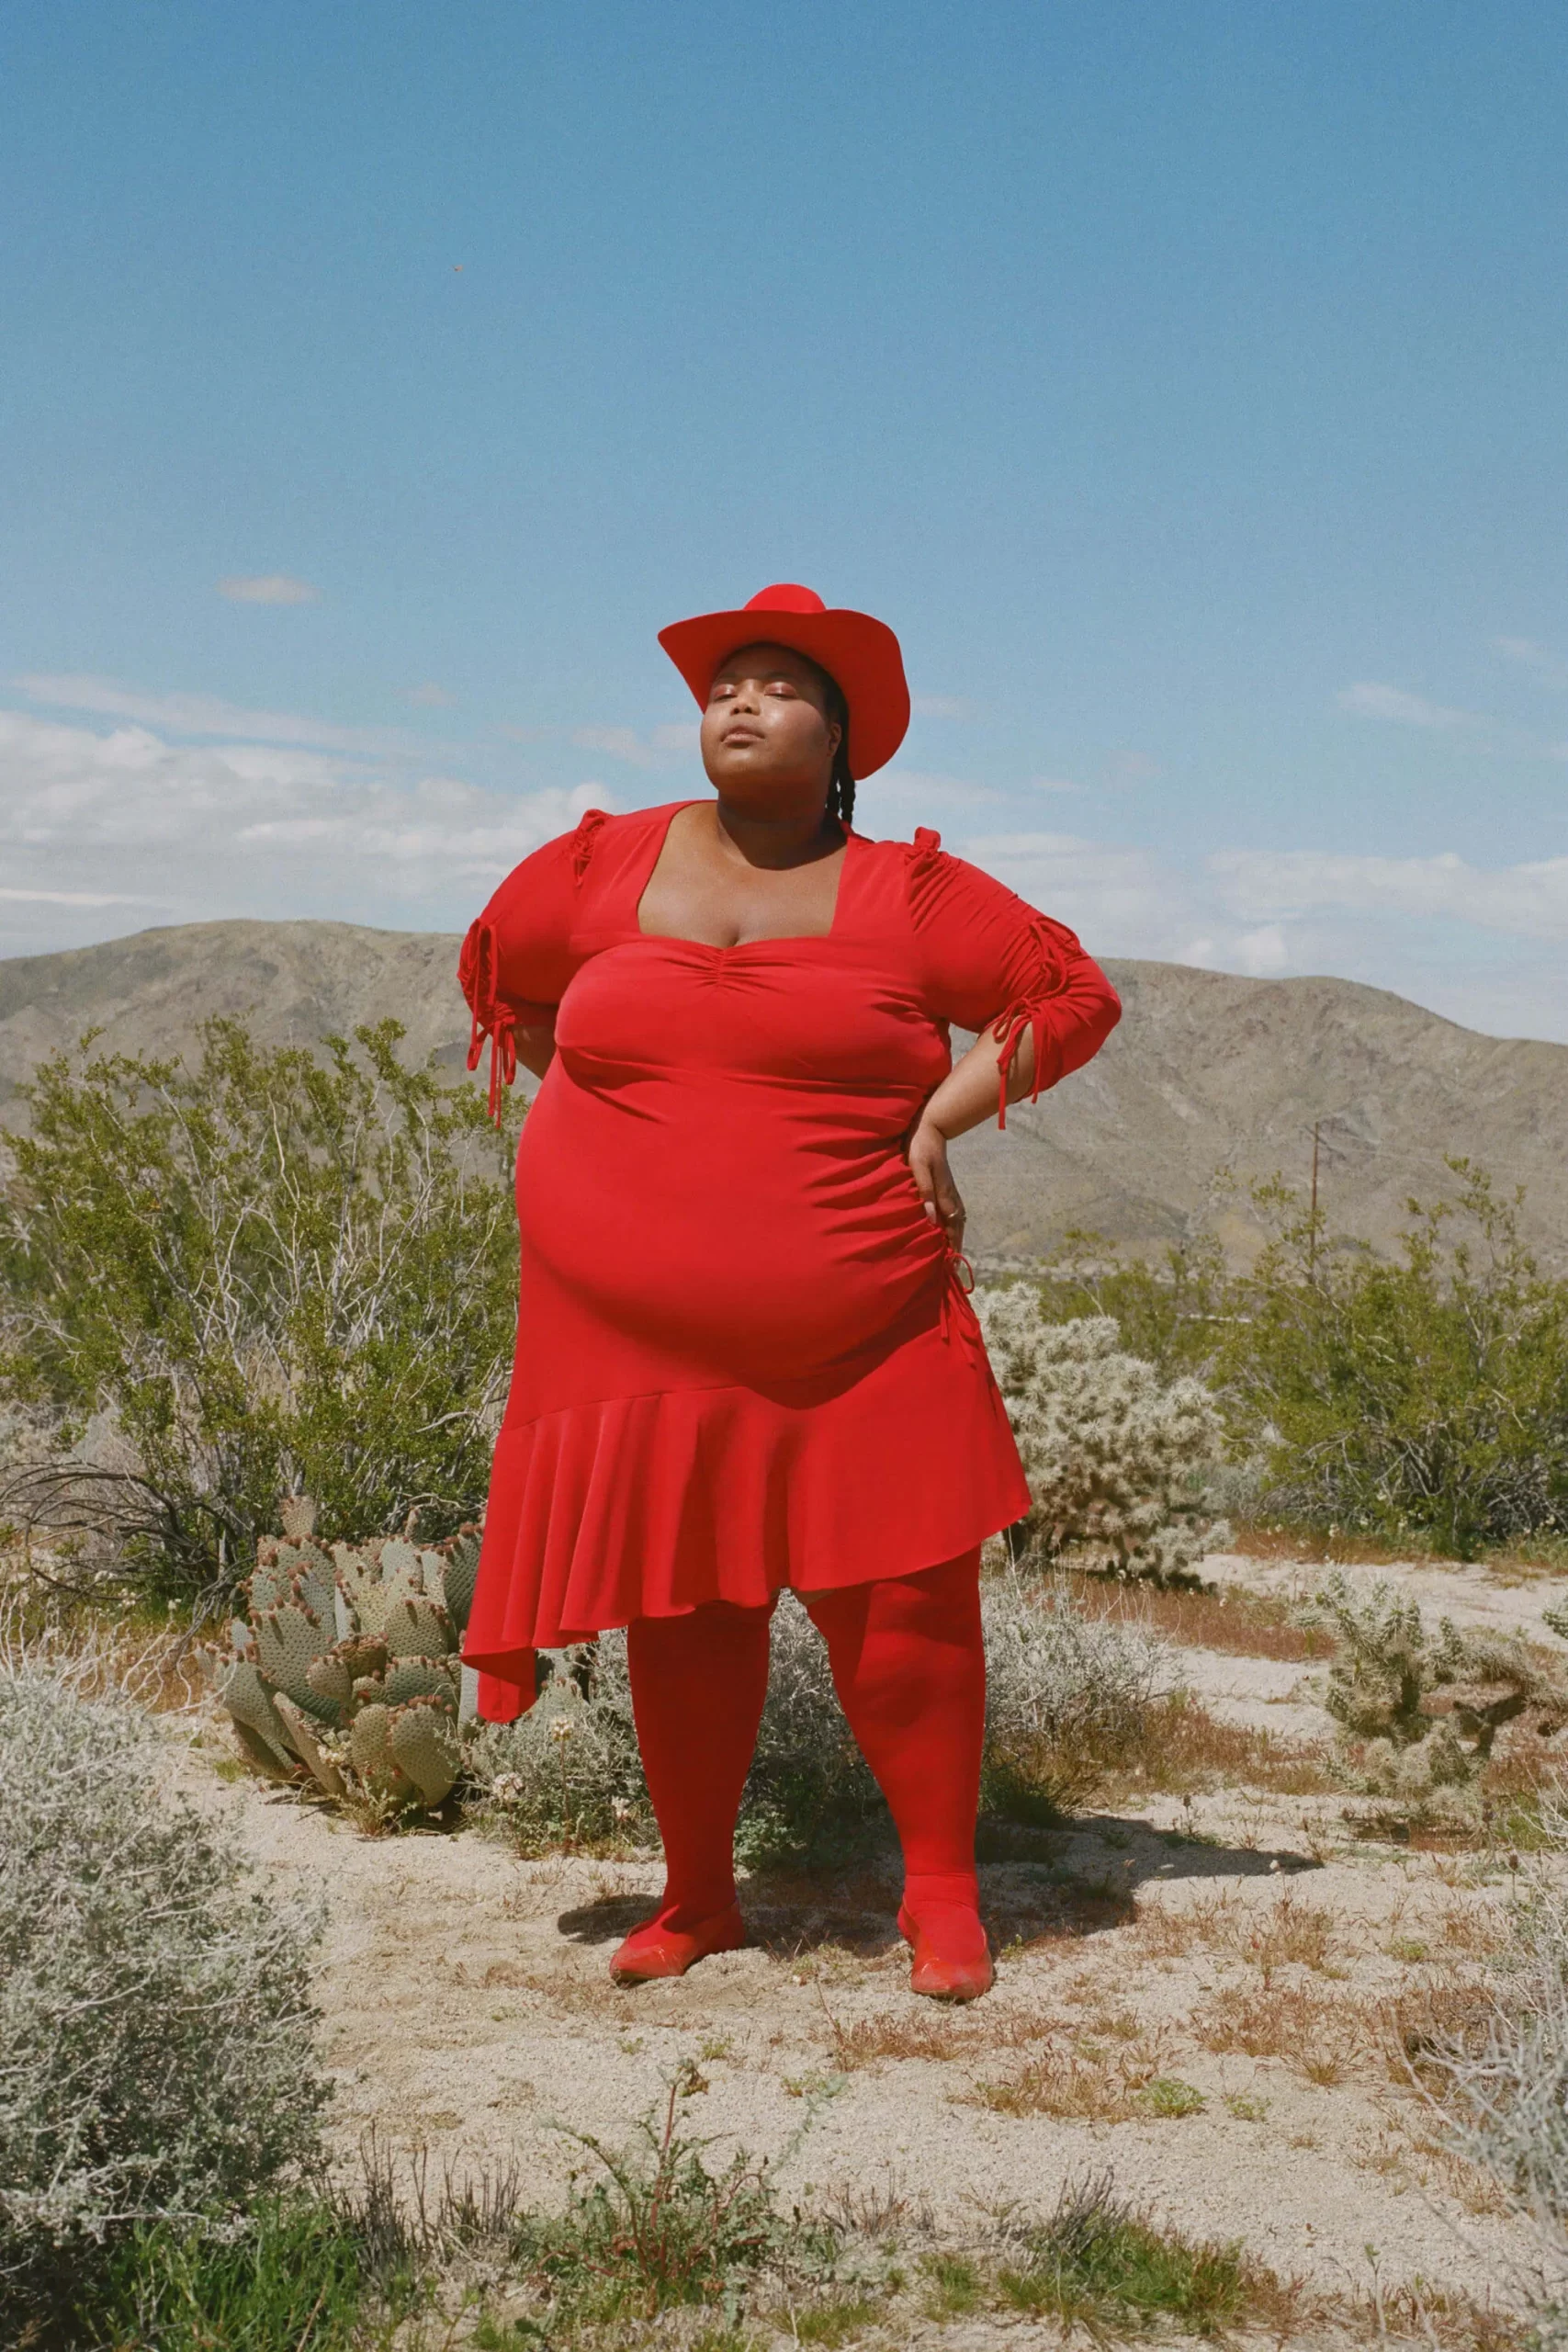 “Body Confidence in Every Size: Empowering Women through Fashion”